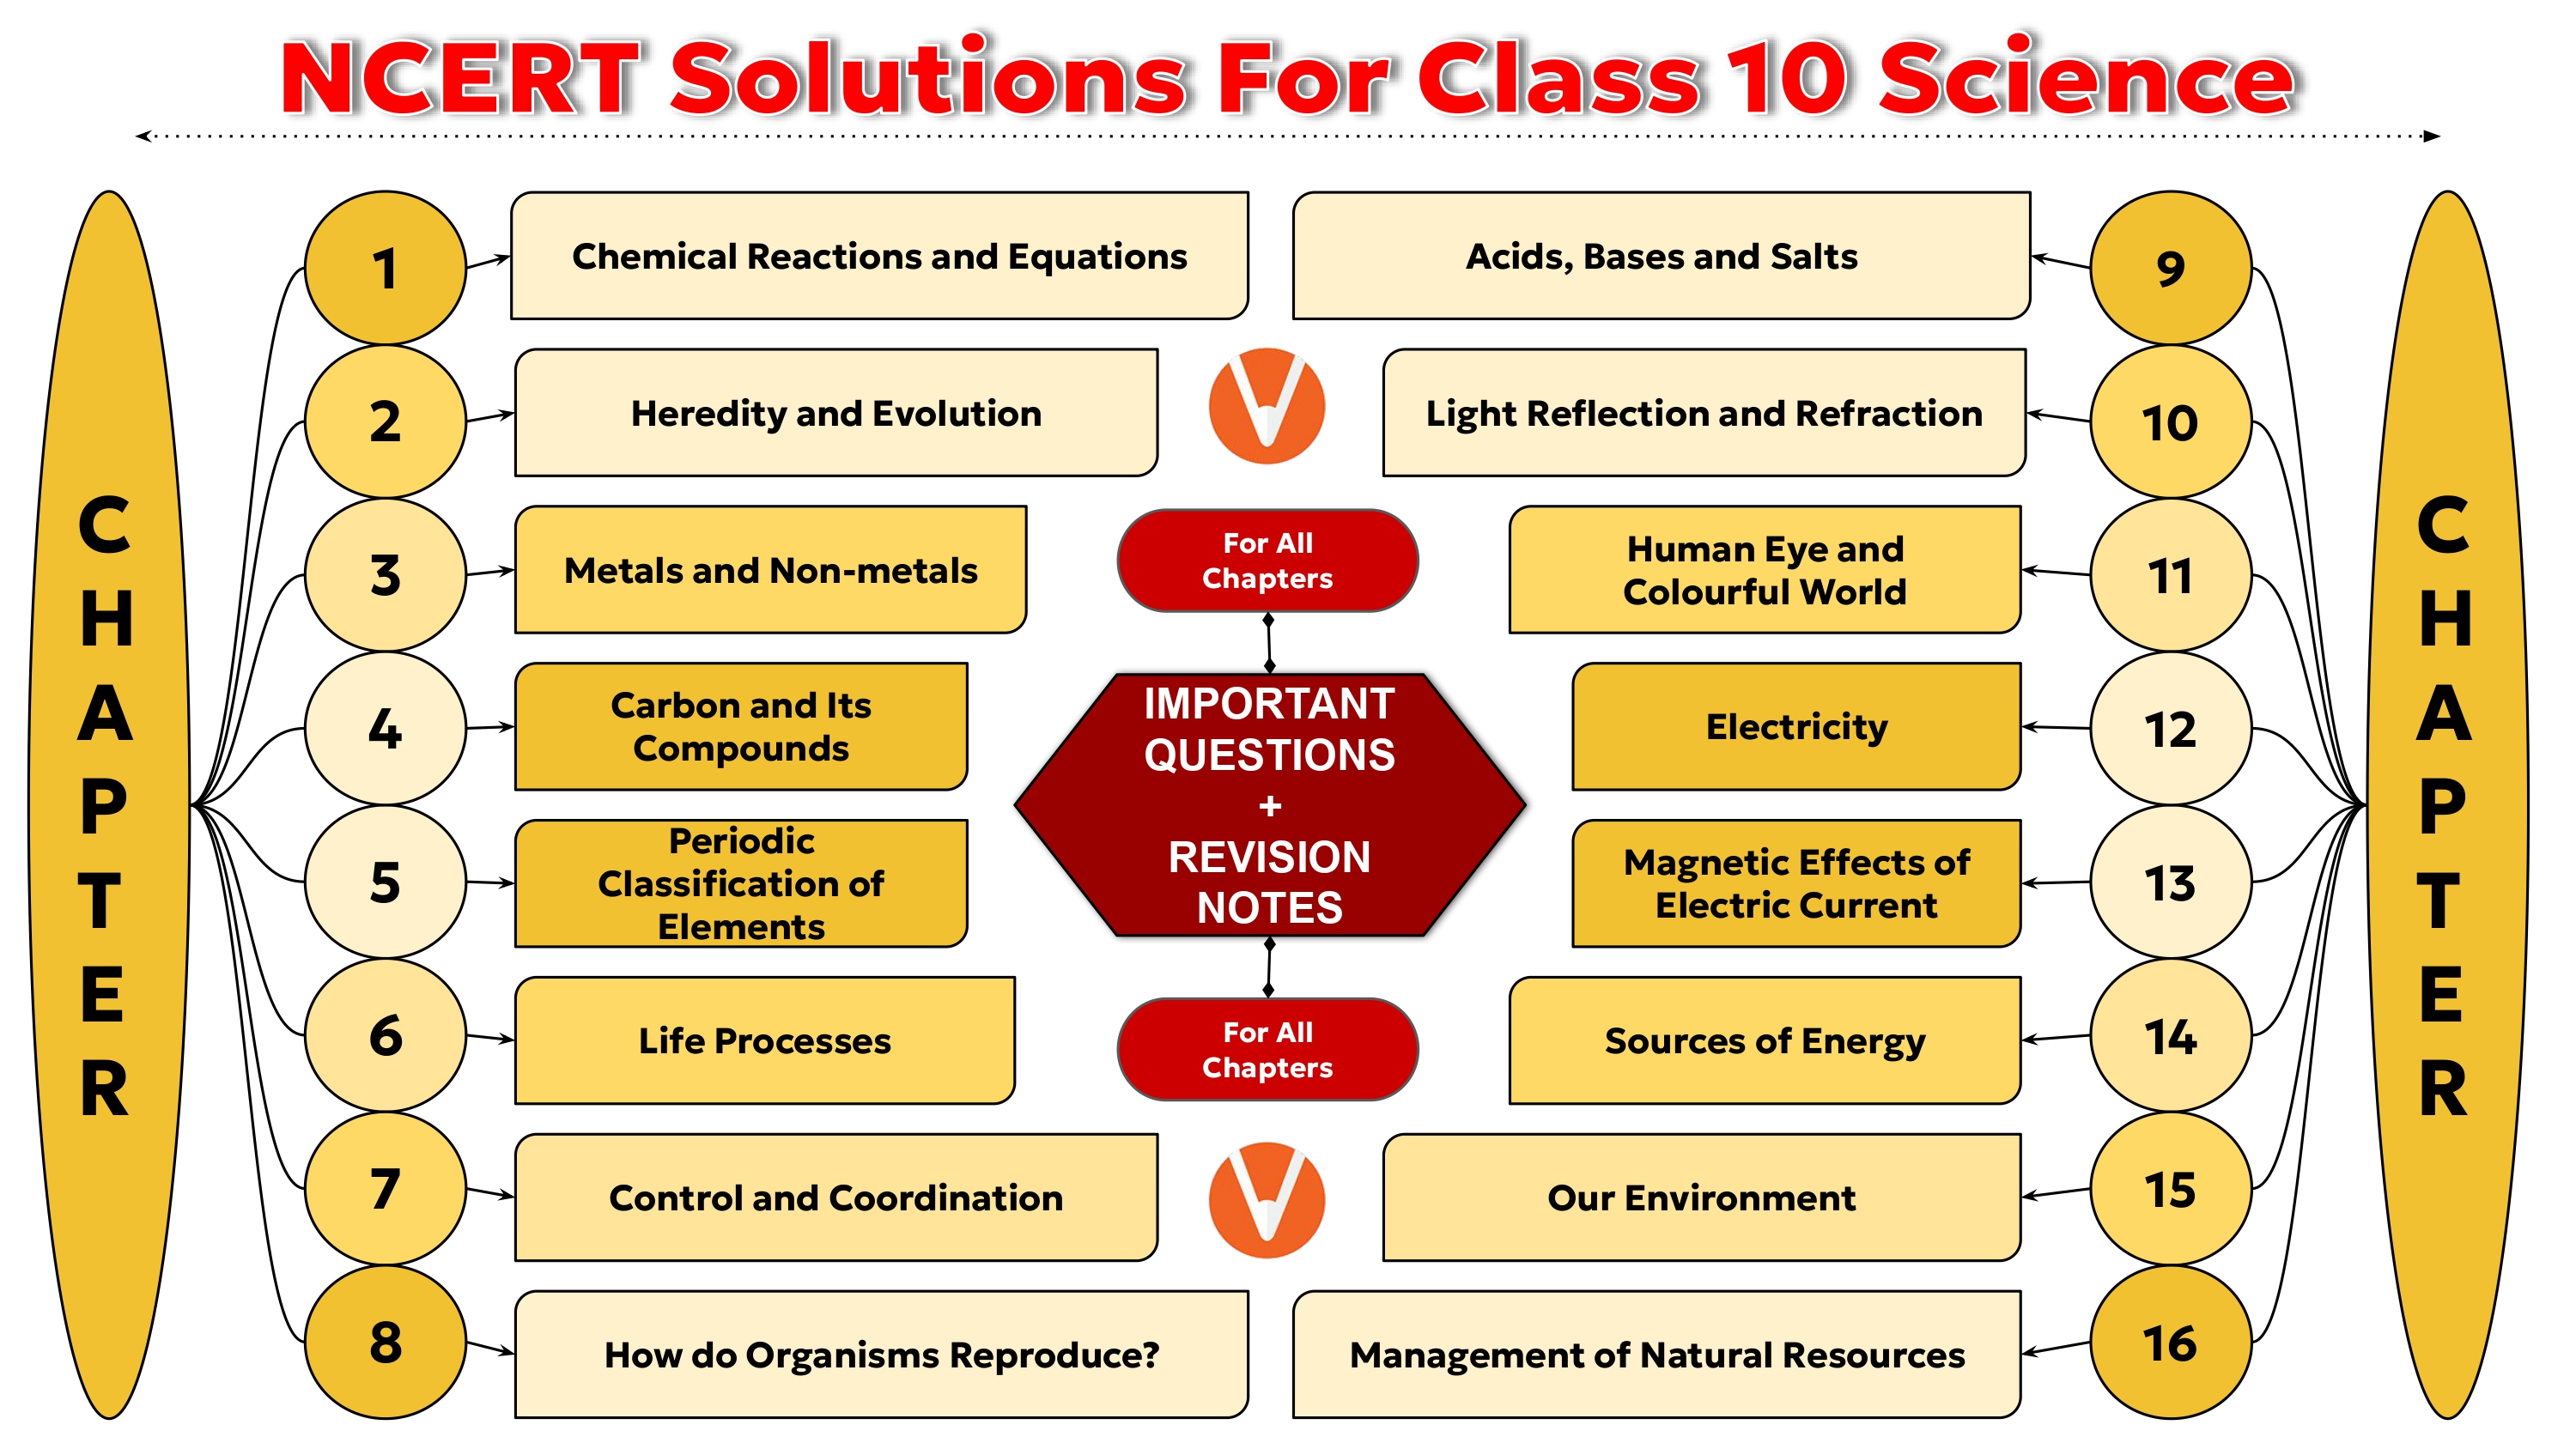 NCERT Solution for Class 10 Science Chapter wise image